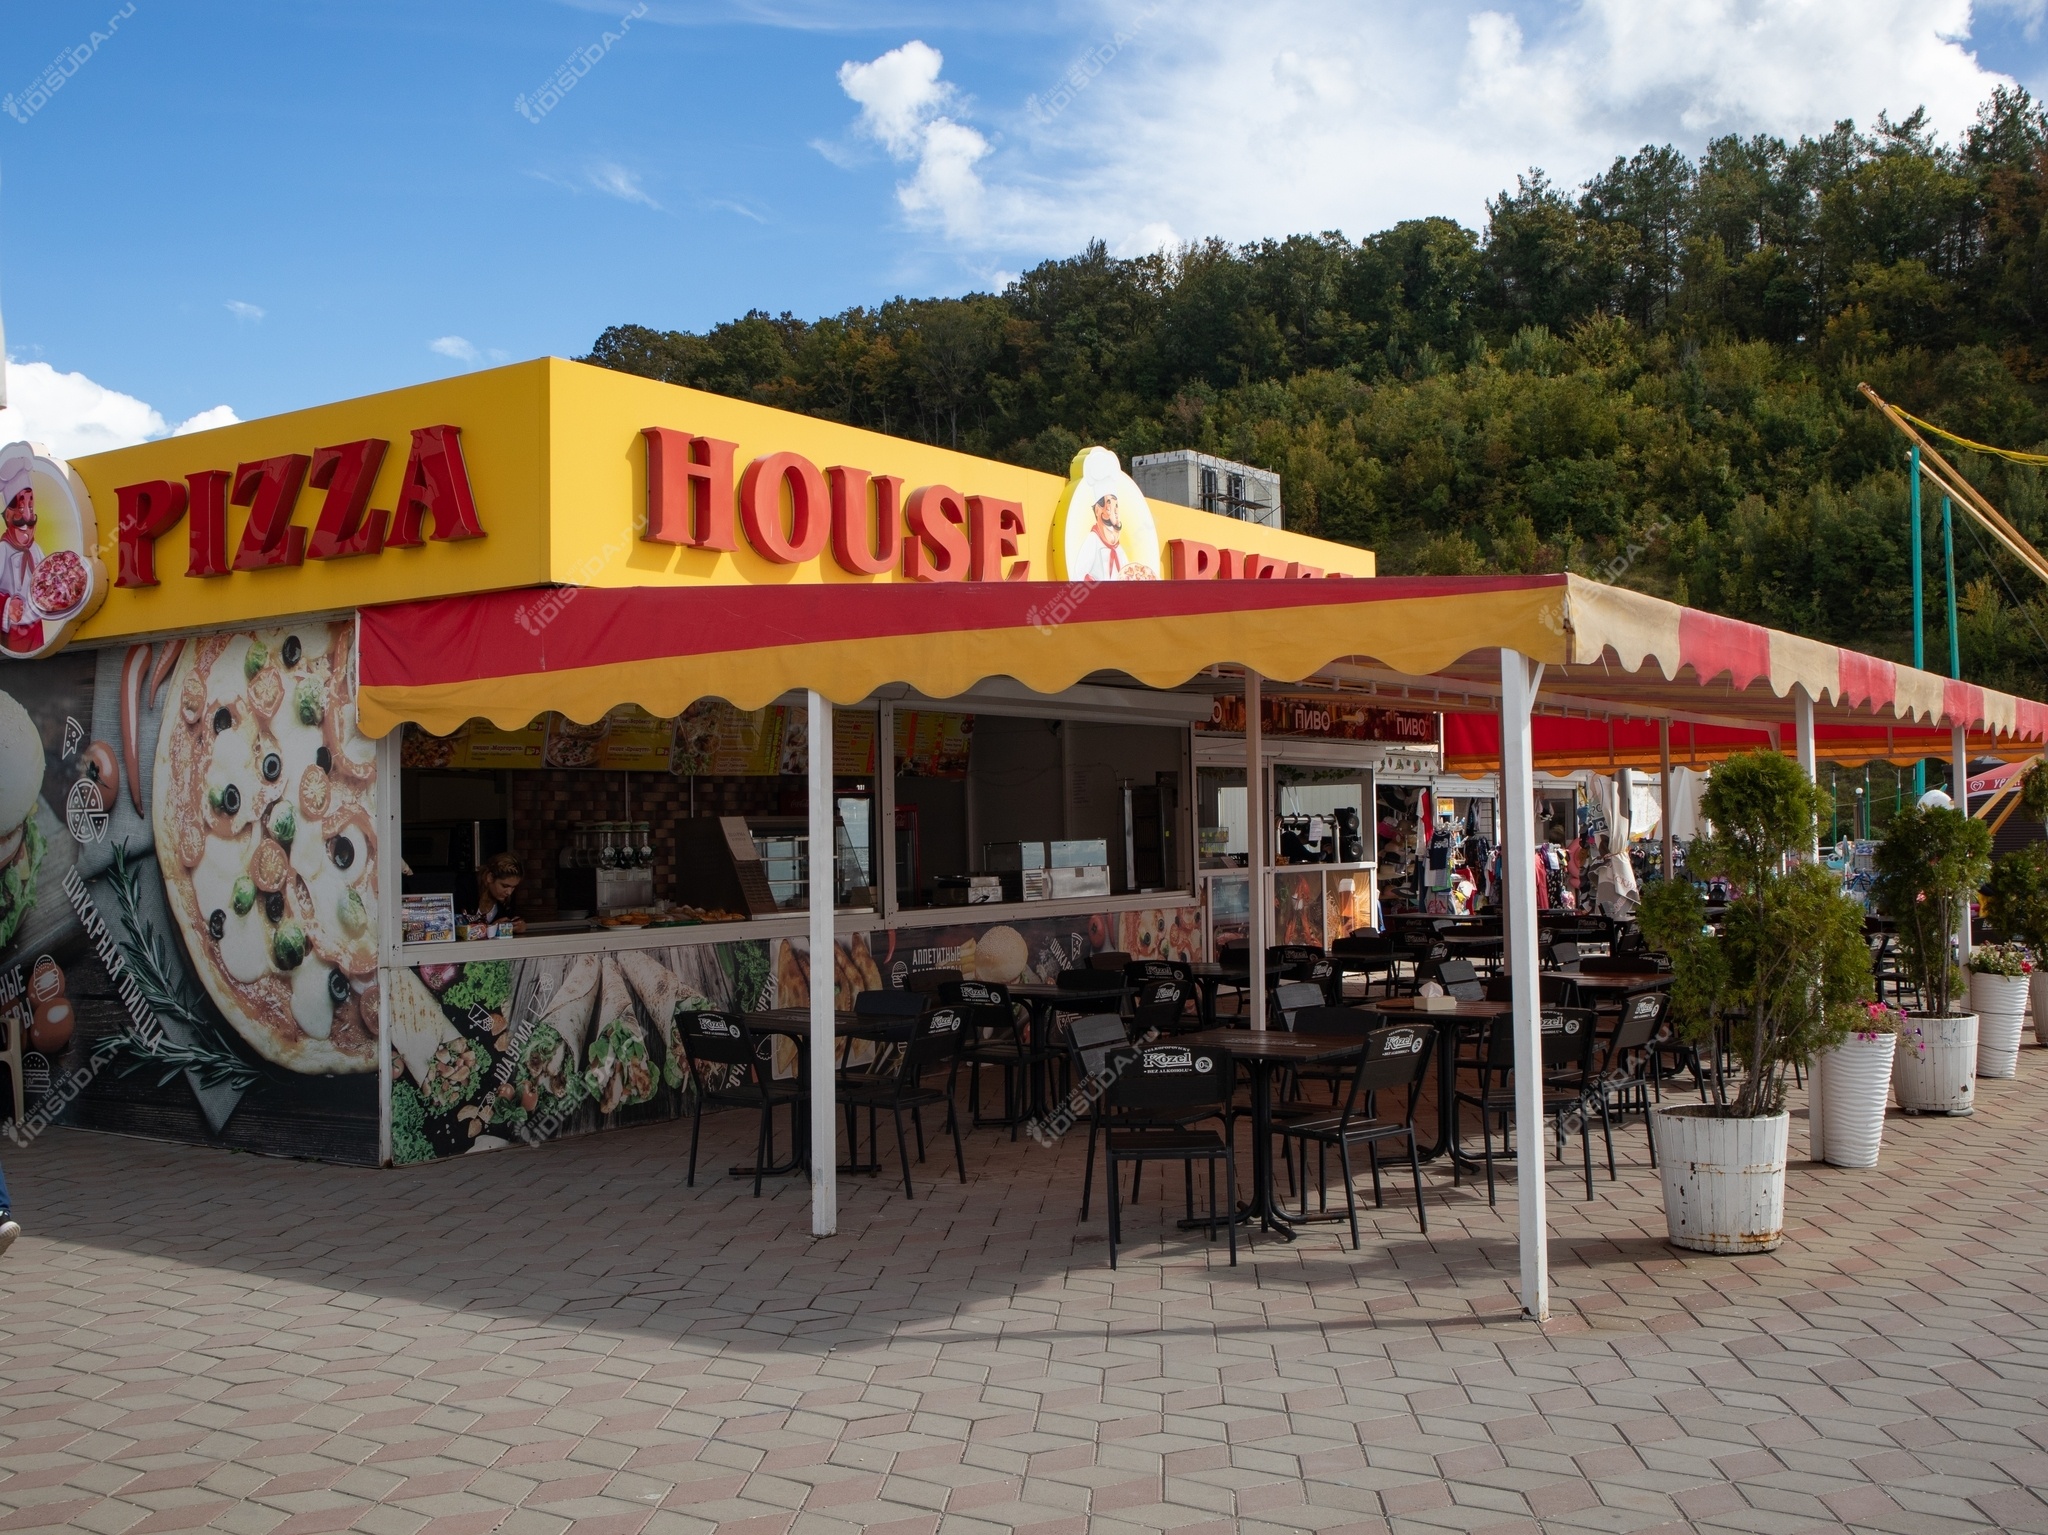 , , , - House Pizza ( )  